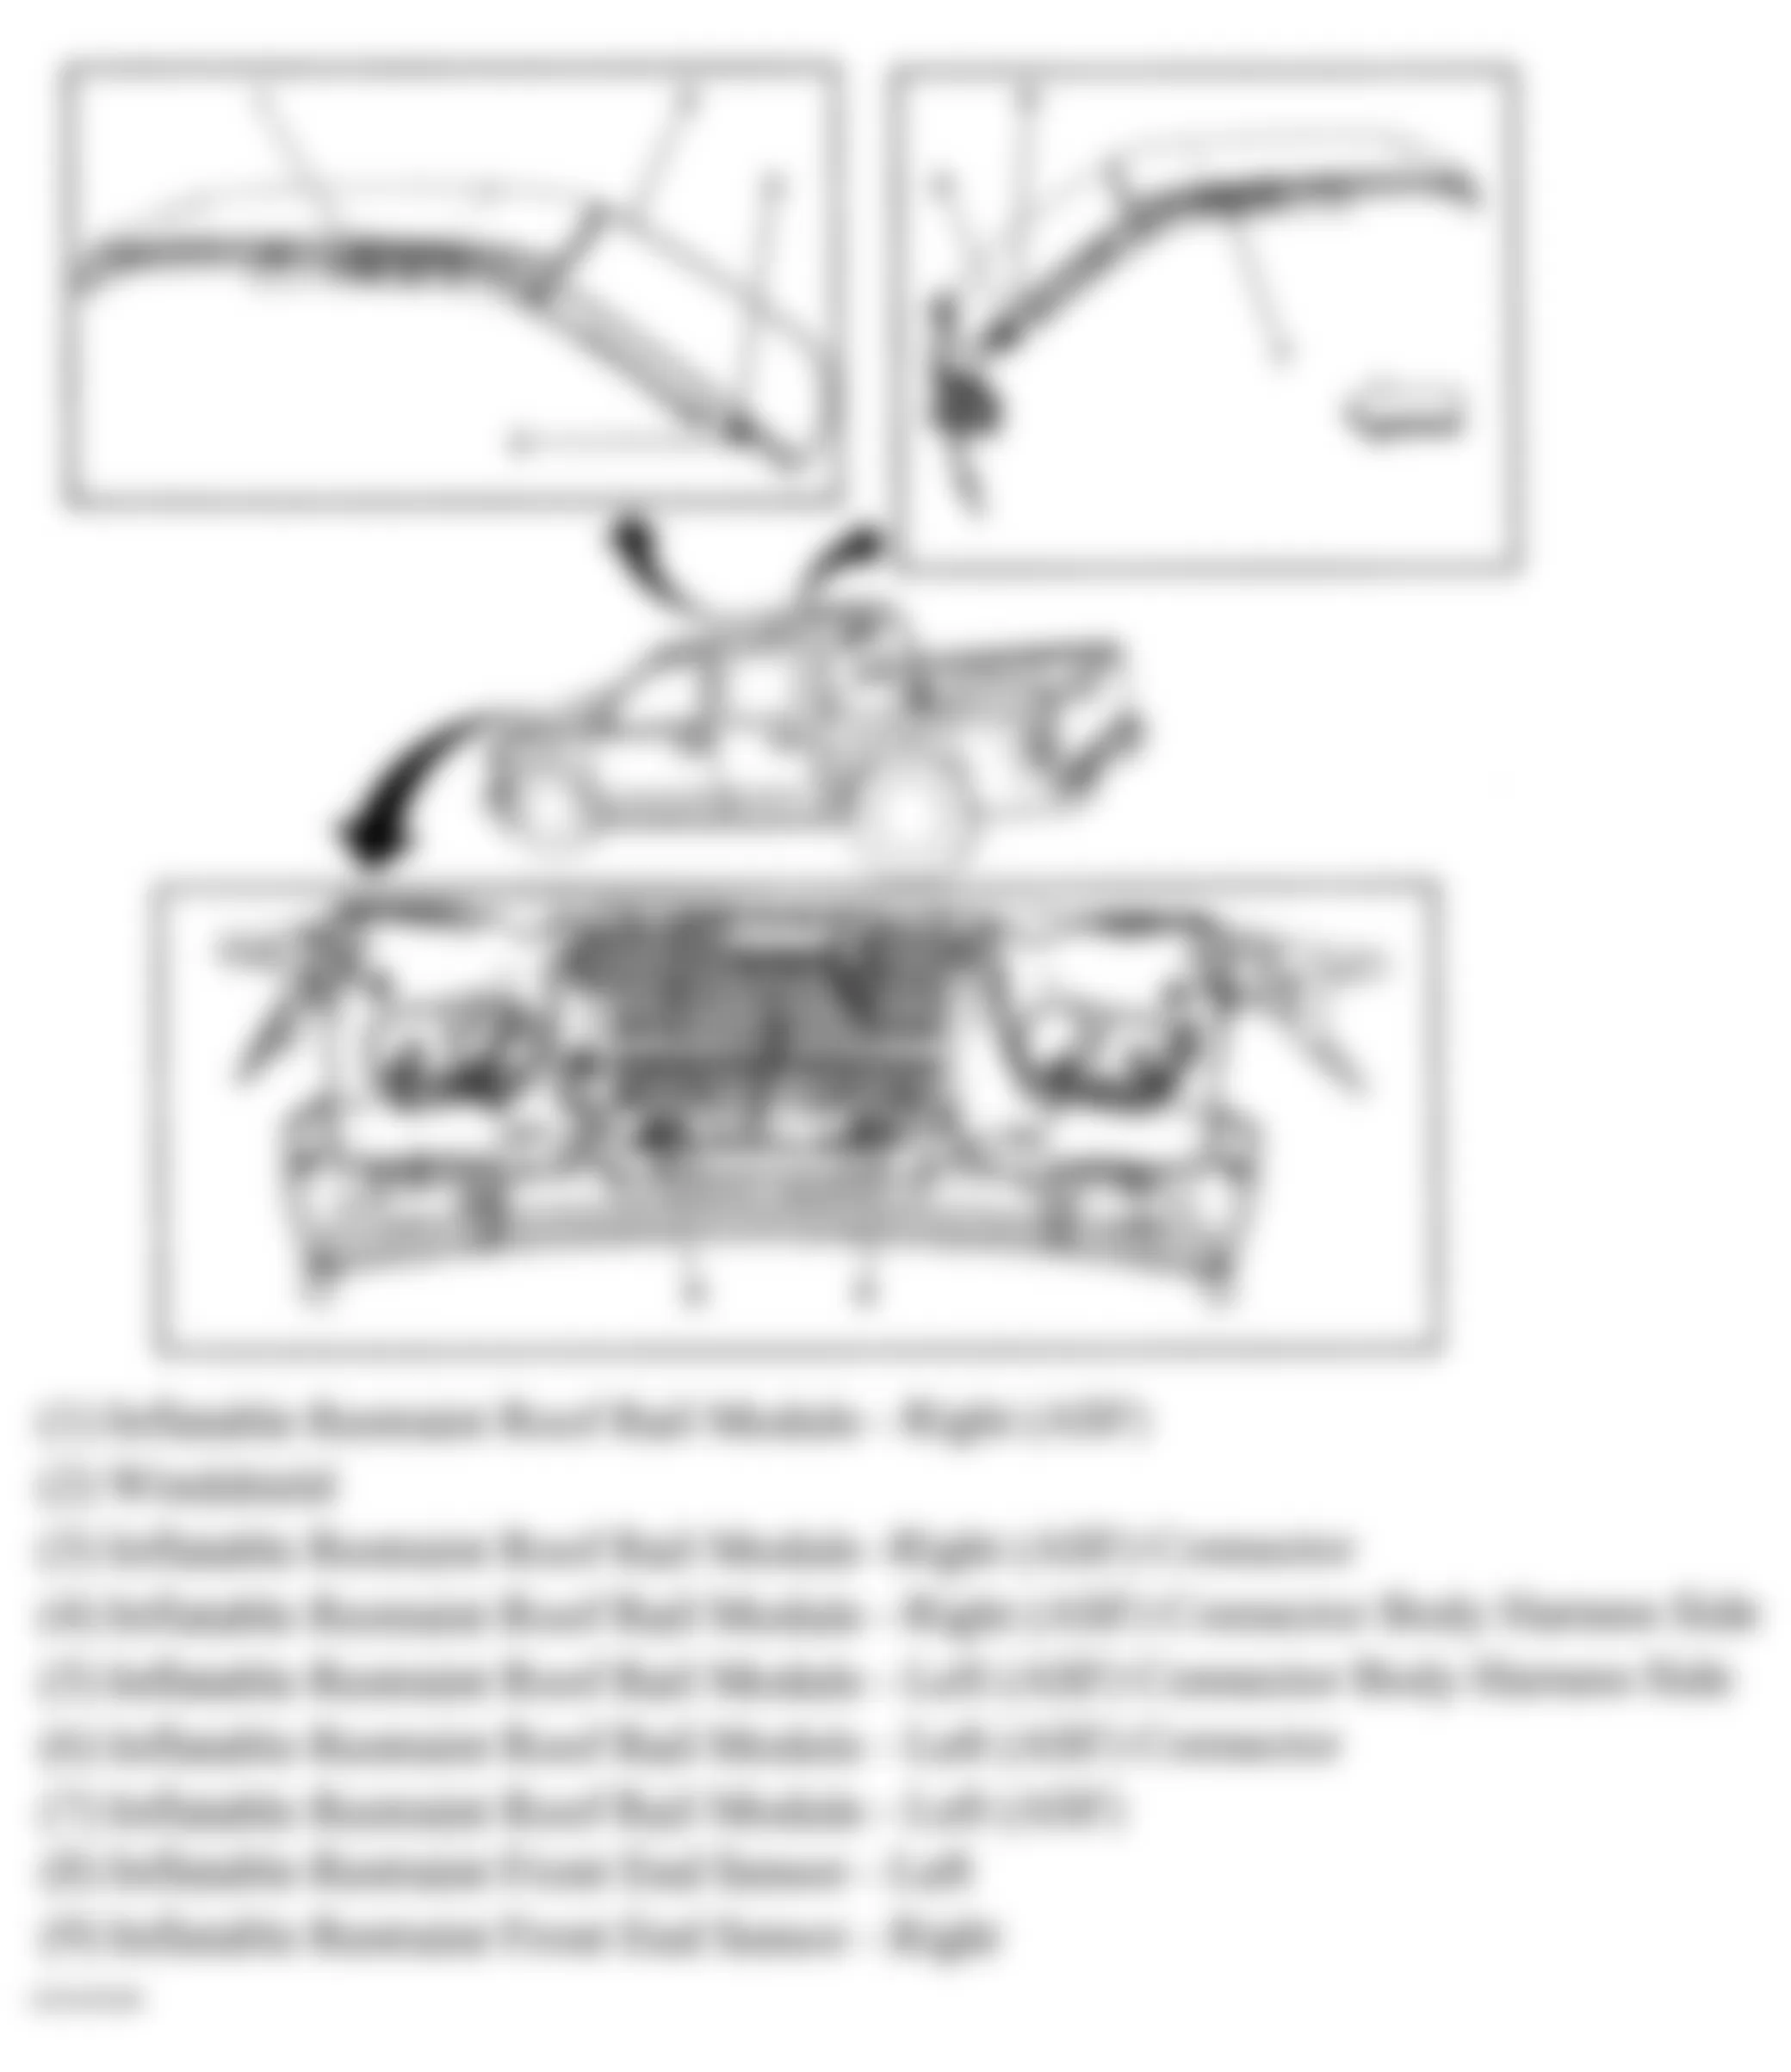 Chevrolet Colorado 2010 - Component Locations -  SIR System Front/Roof Rail